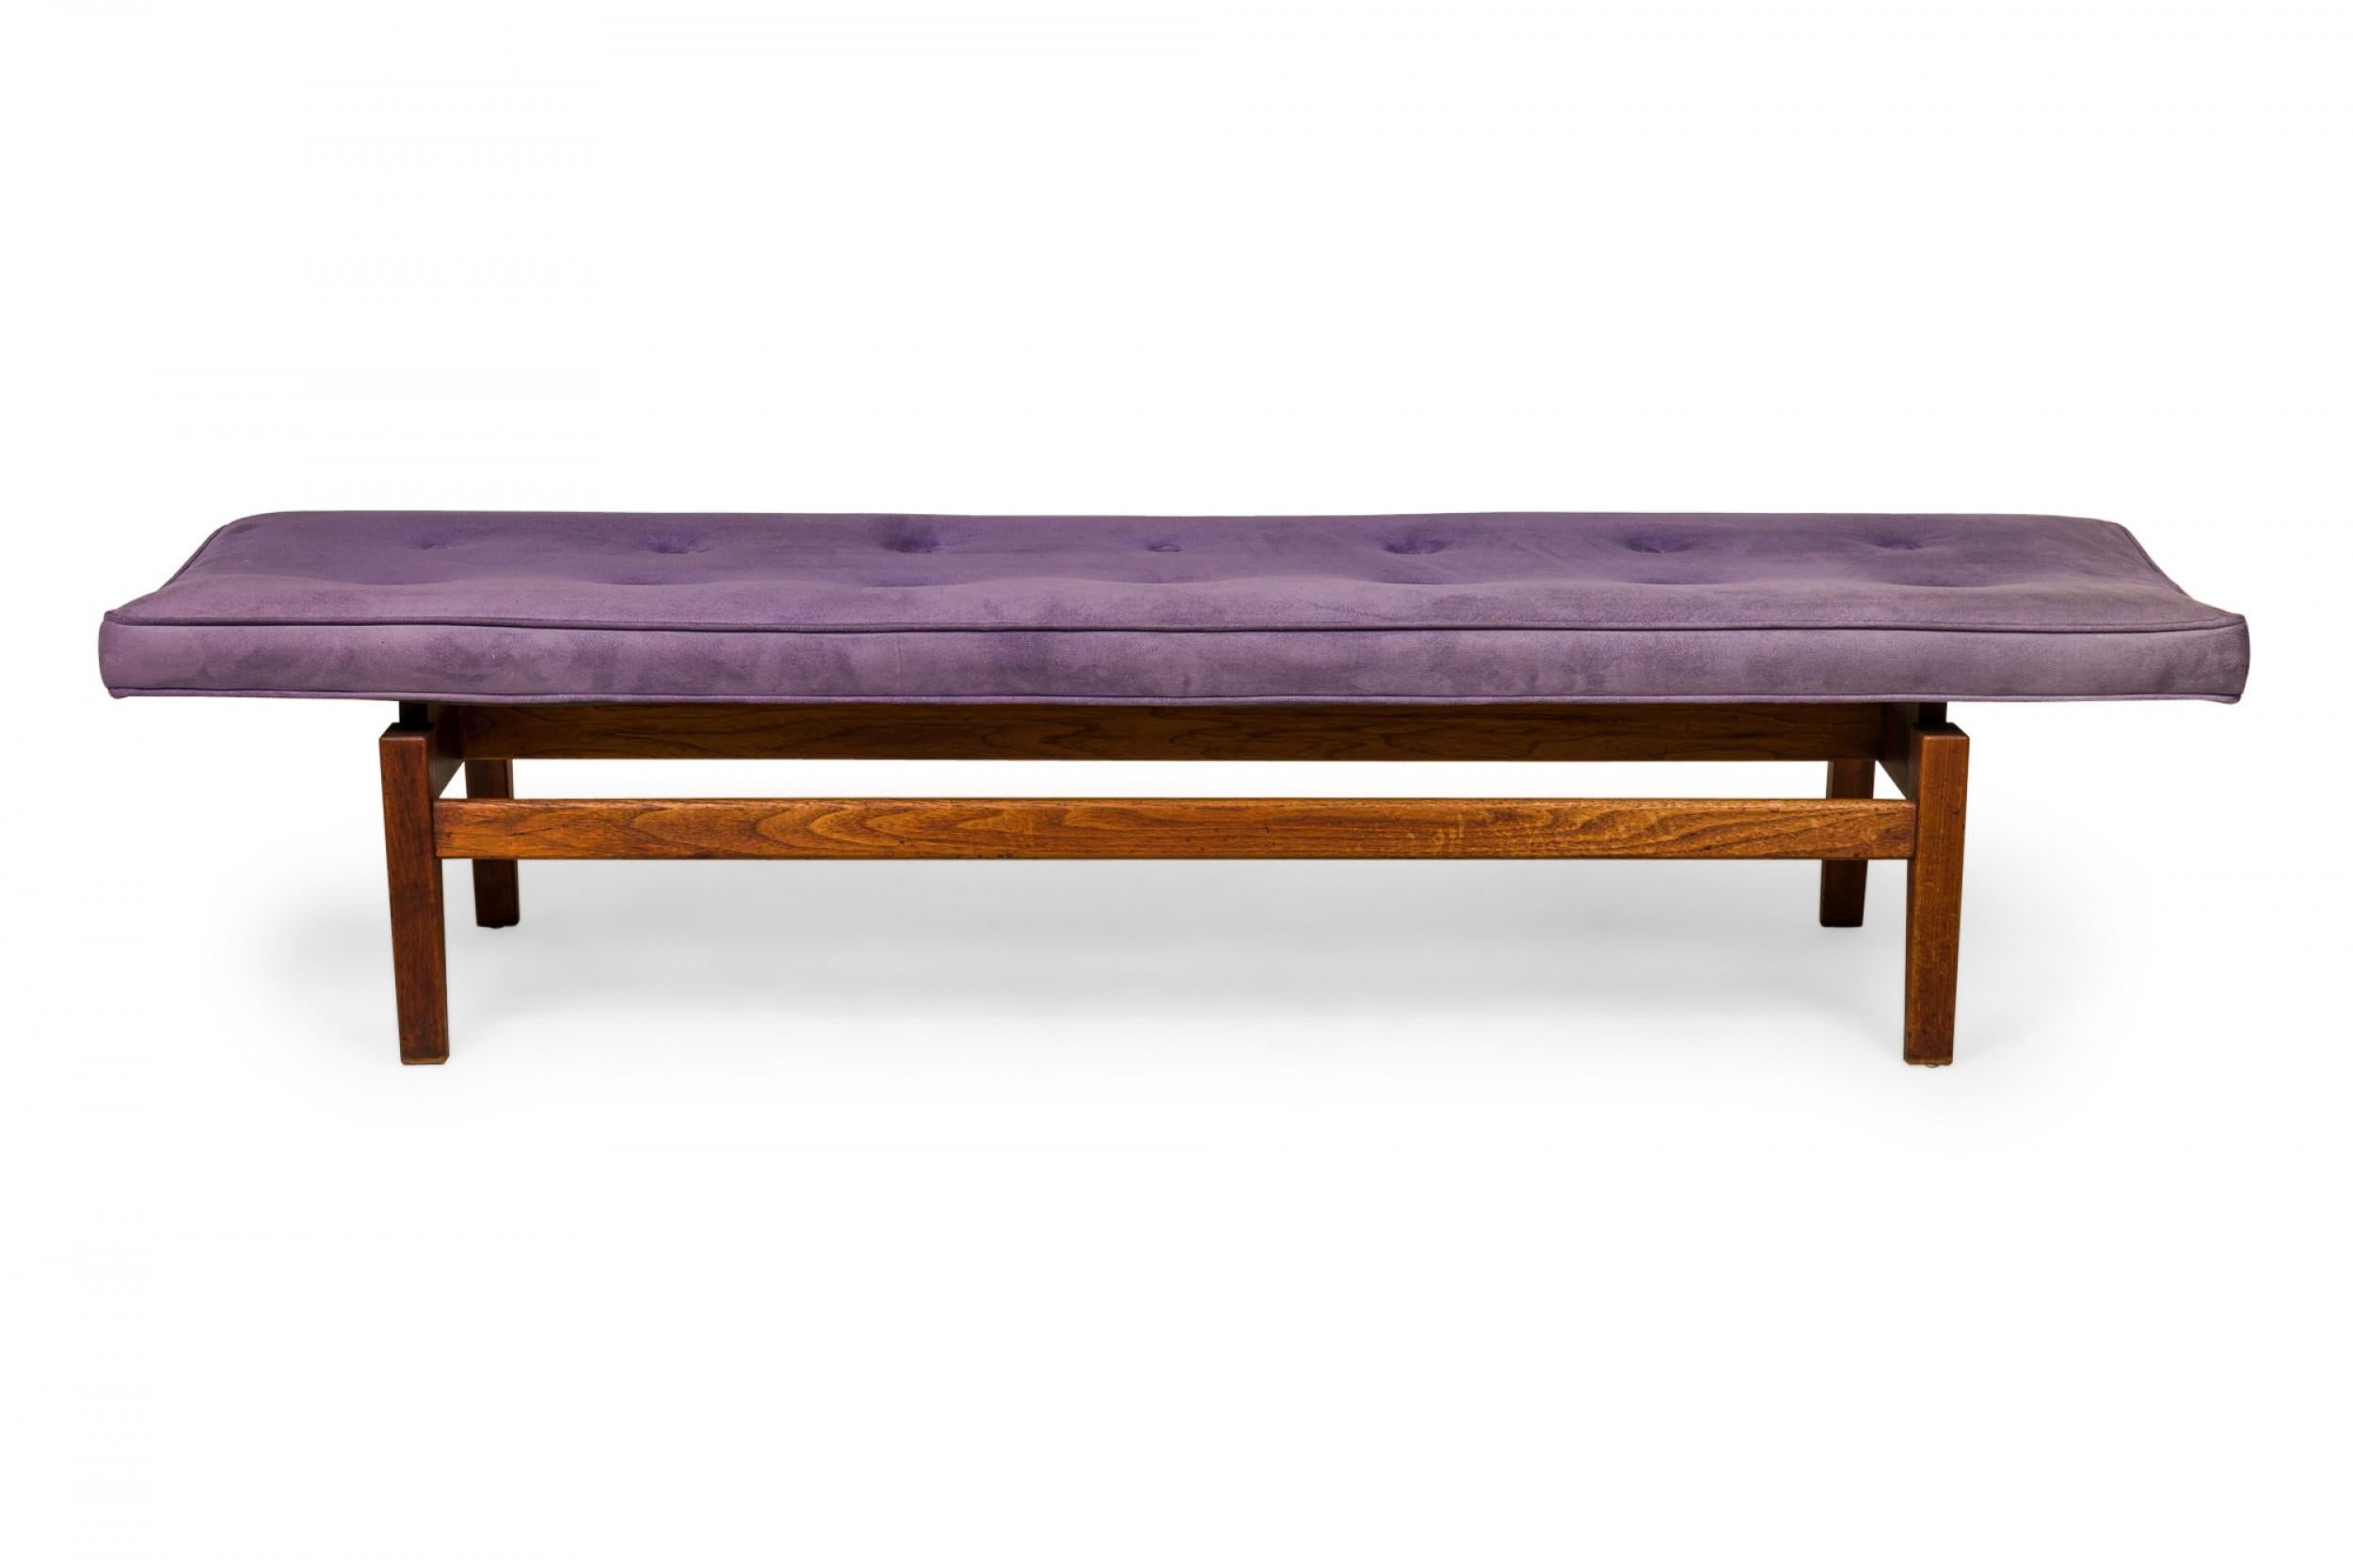 Danish Mid-Century rectangular floating bench with a purple button tufted velour seat resting on a wooden floating frame base. (JENS RISOM).
 